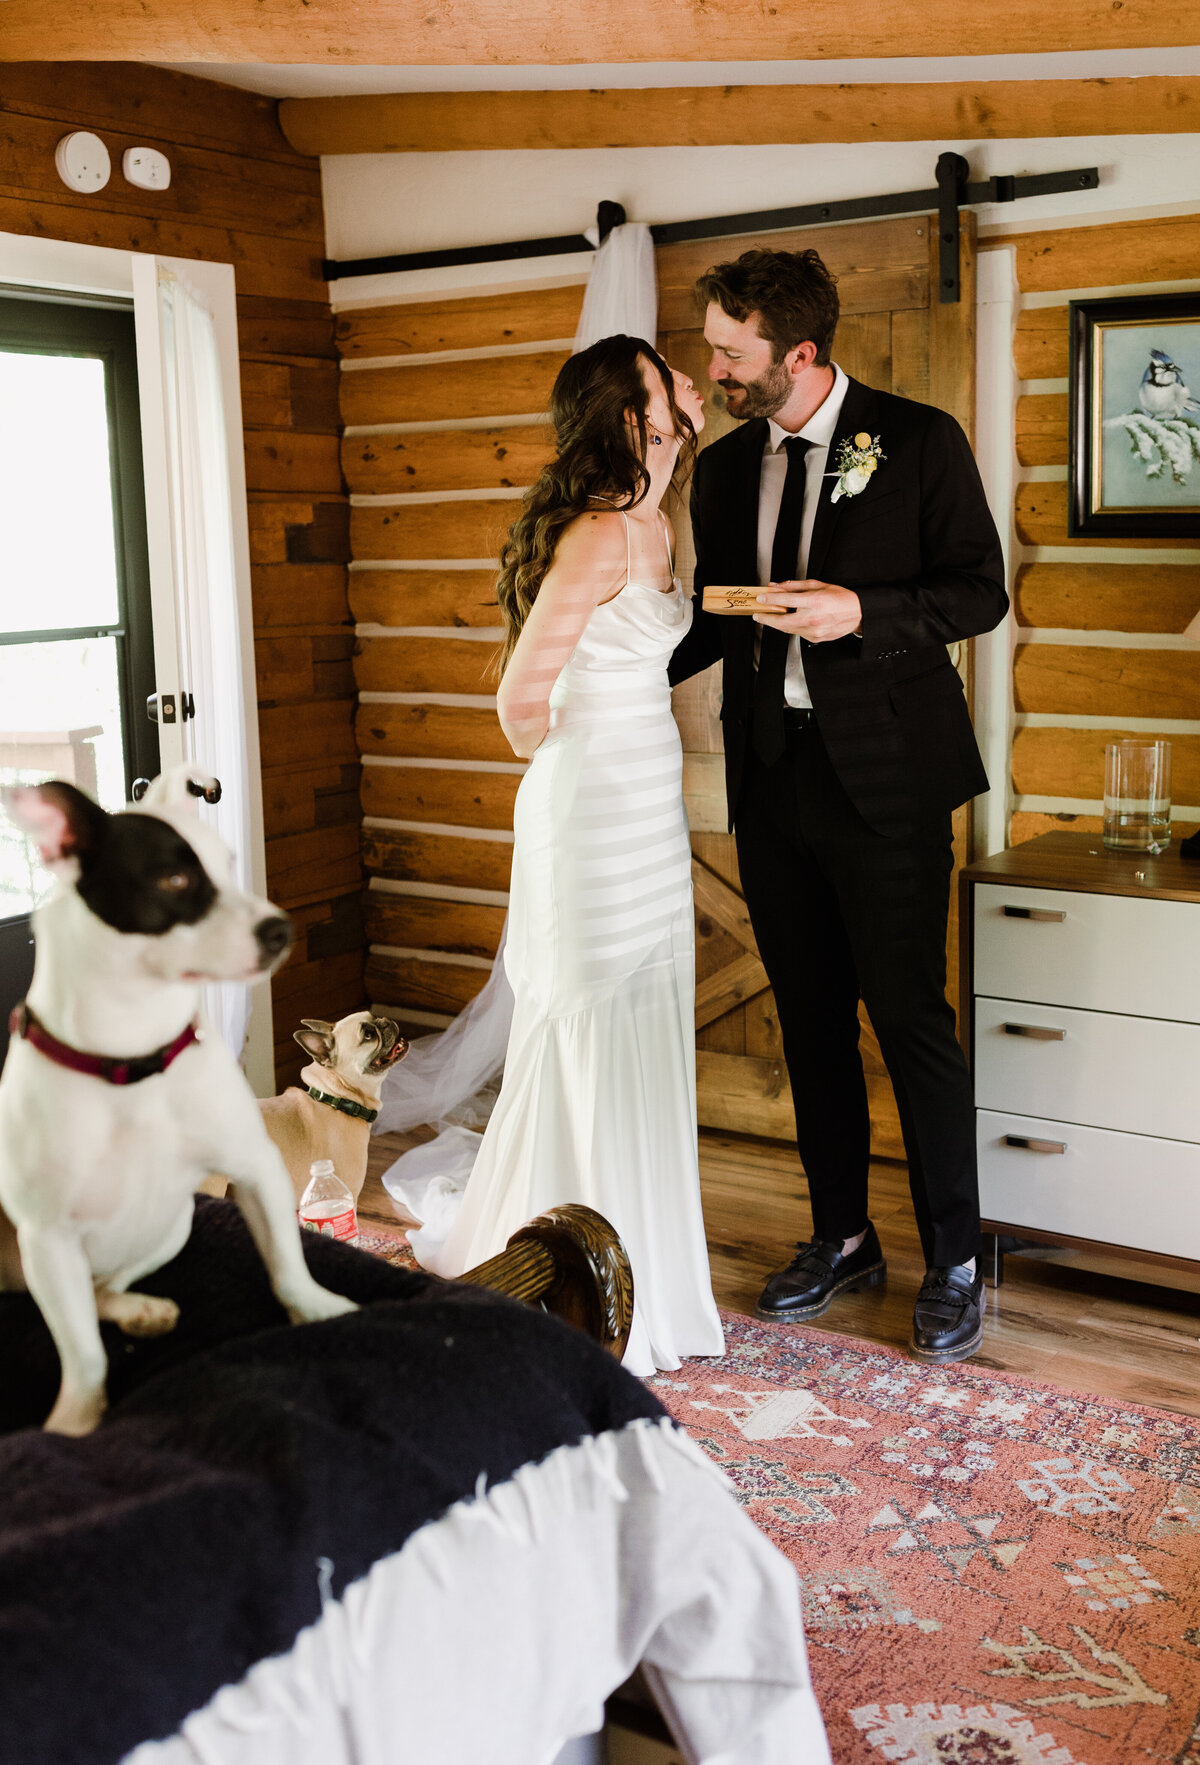 Dog sitting on bed whilst bride and groom kiss in the background